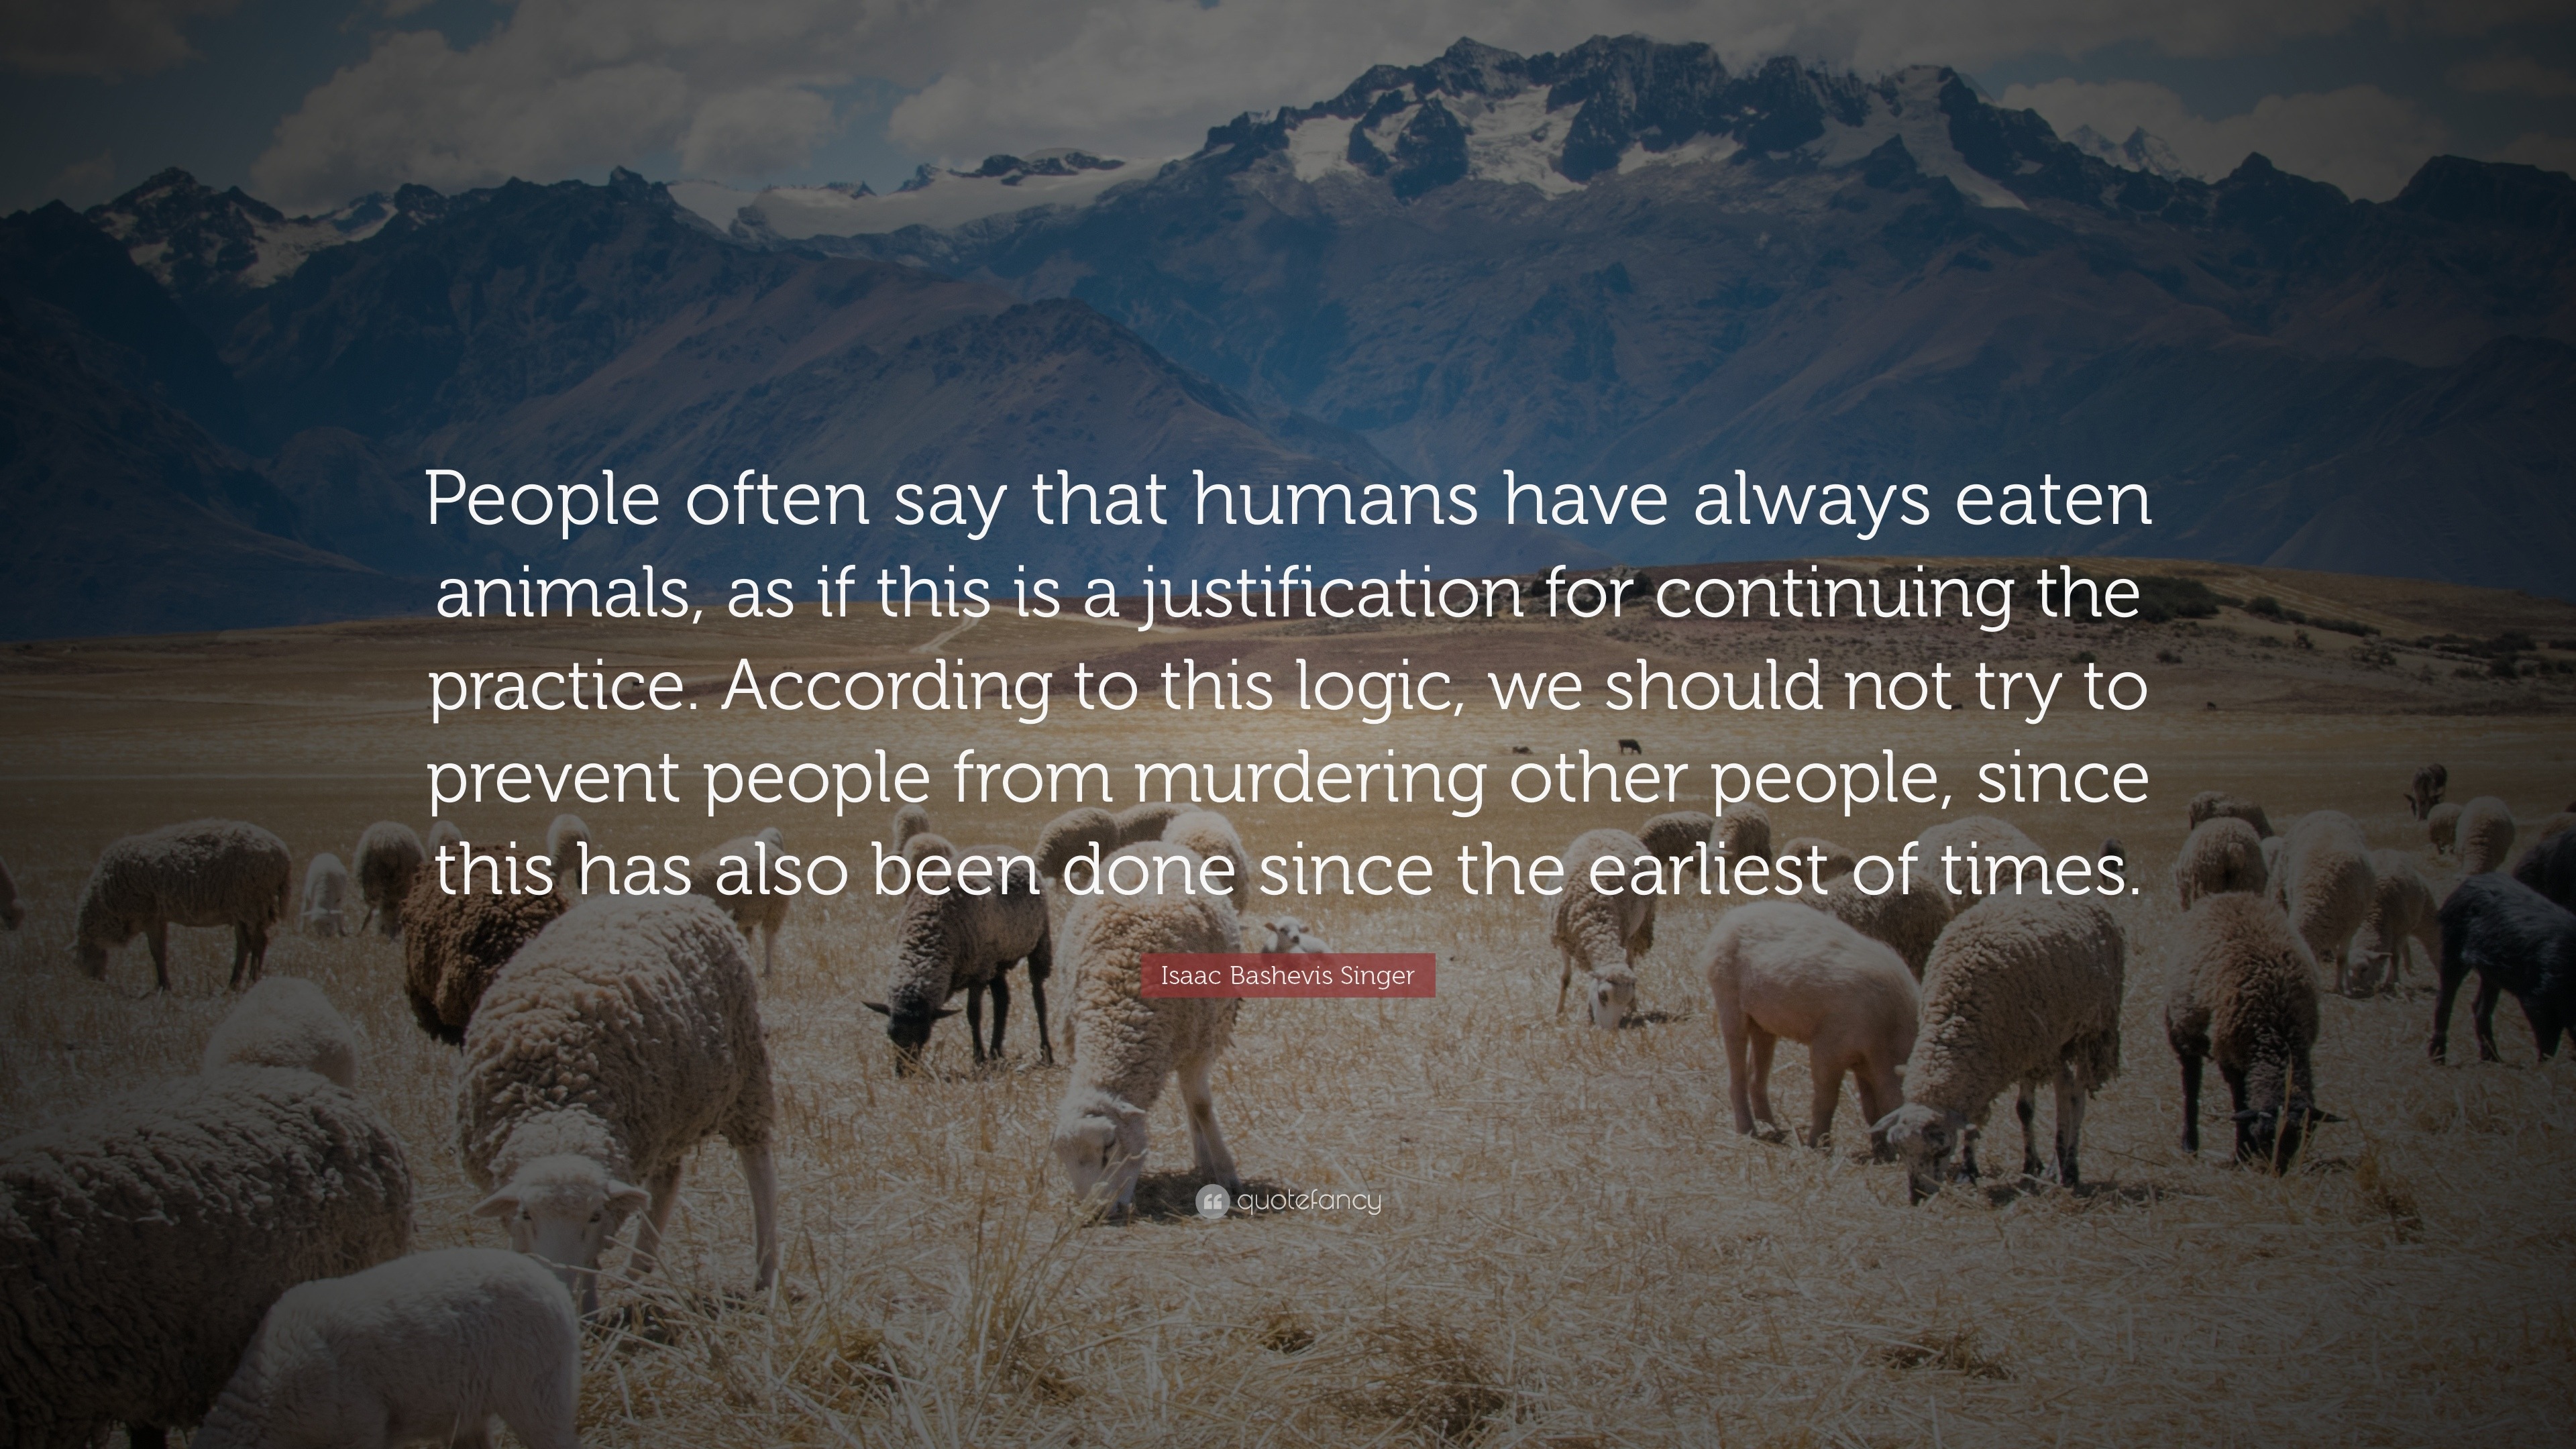 Isaac Bashevis Singer Quote: “People often say that humans have always  eaten animals, as if this is a justification for continuing the practice.  Accor...”